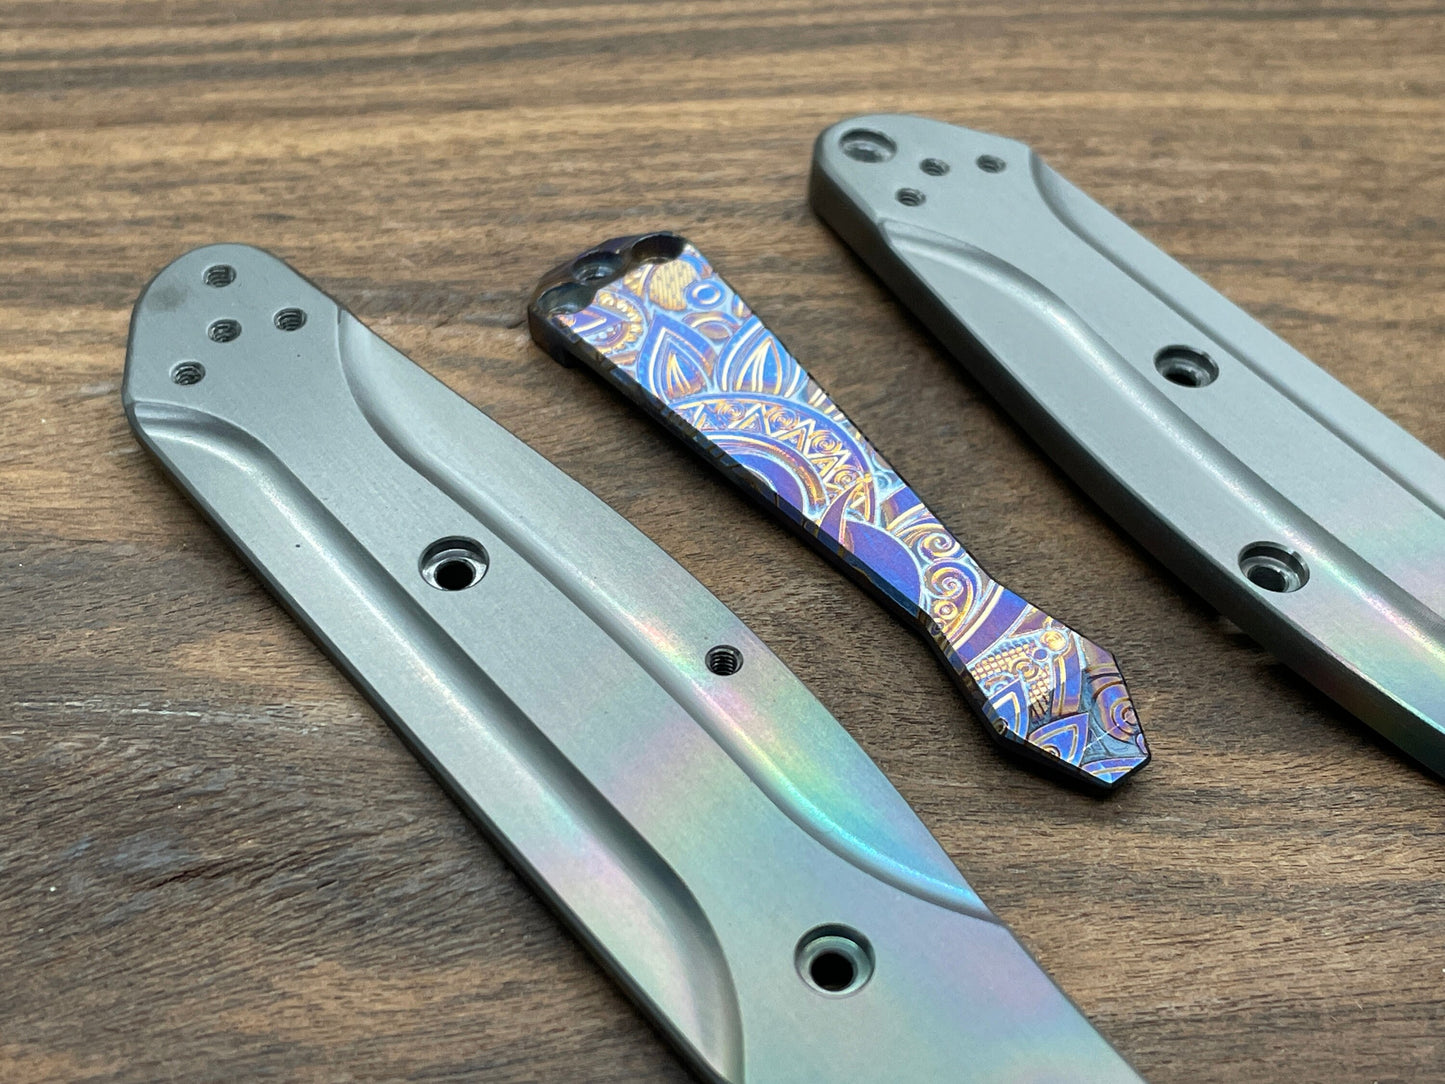 Flamed SUNRISE heat ano engraved Dmd Titanium CLIP for most Benchmade models